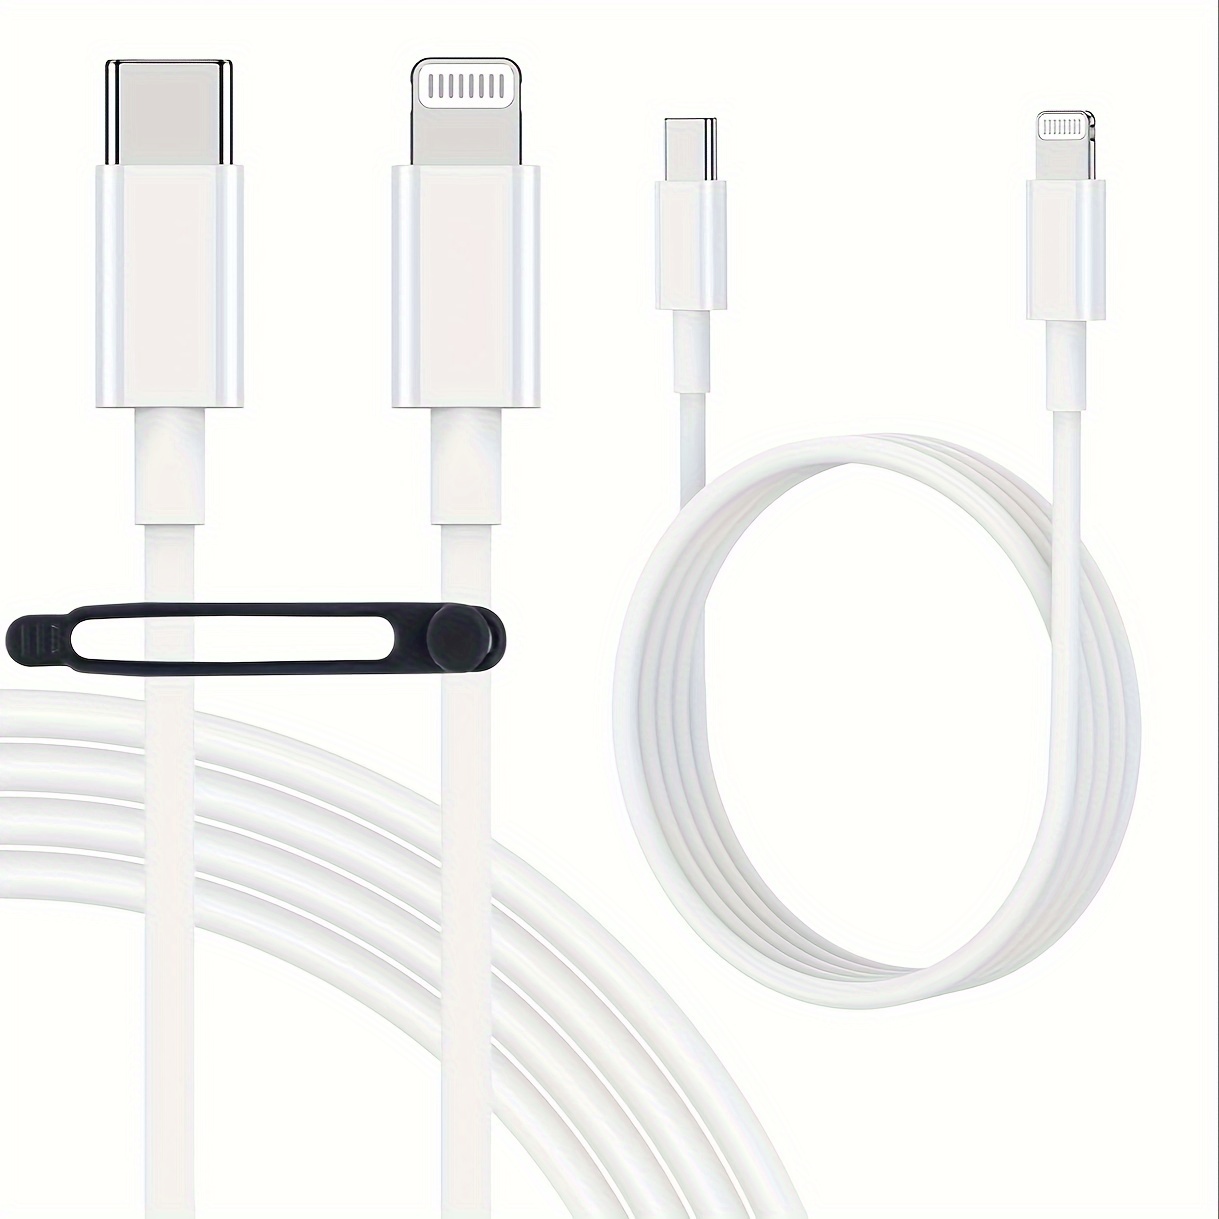 

[mfi Certification] Suitable For Charger, Usb Type-c Suitable For 13/12/11/11pro/11max/x/xs/xr/xs Max/8/7,